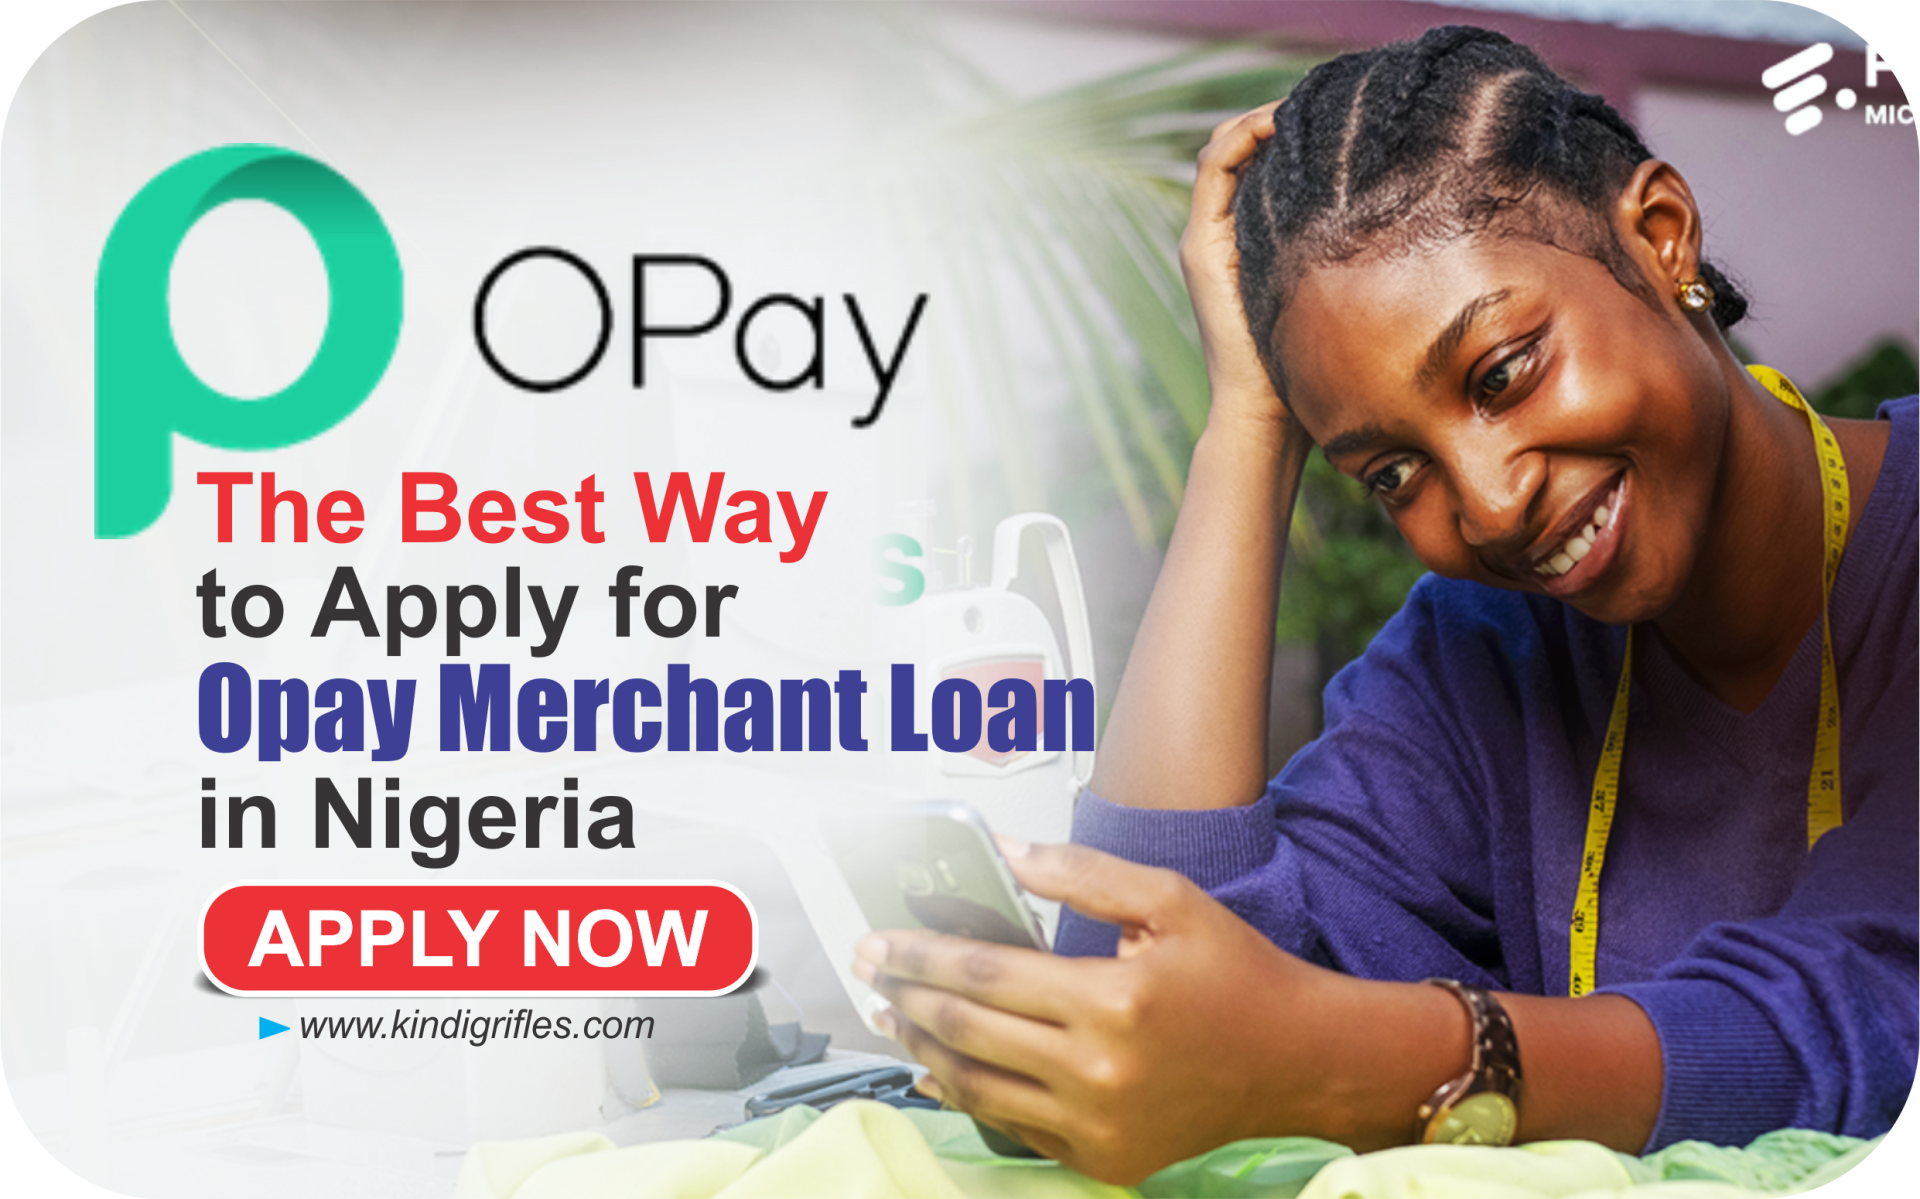 The Best Way to Apply for Opay Merchant Loan in Nigeria